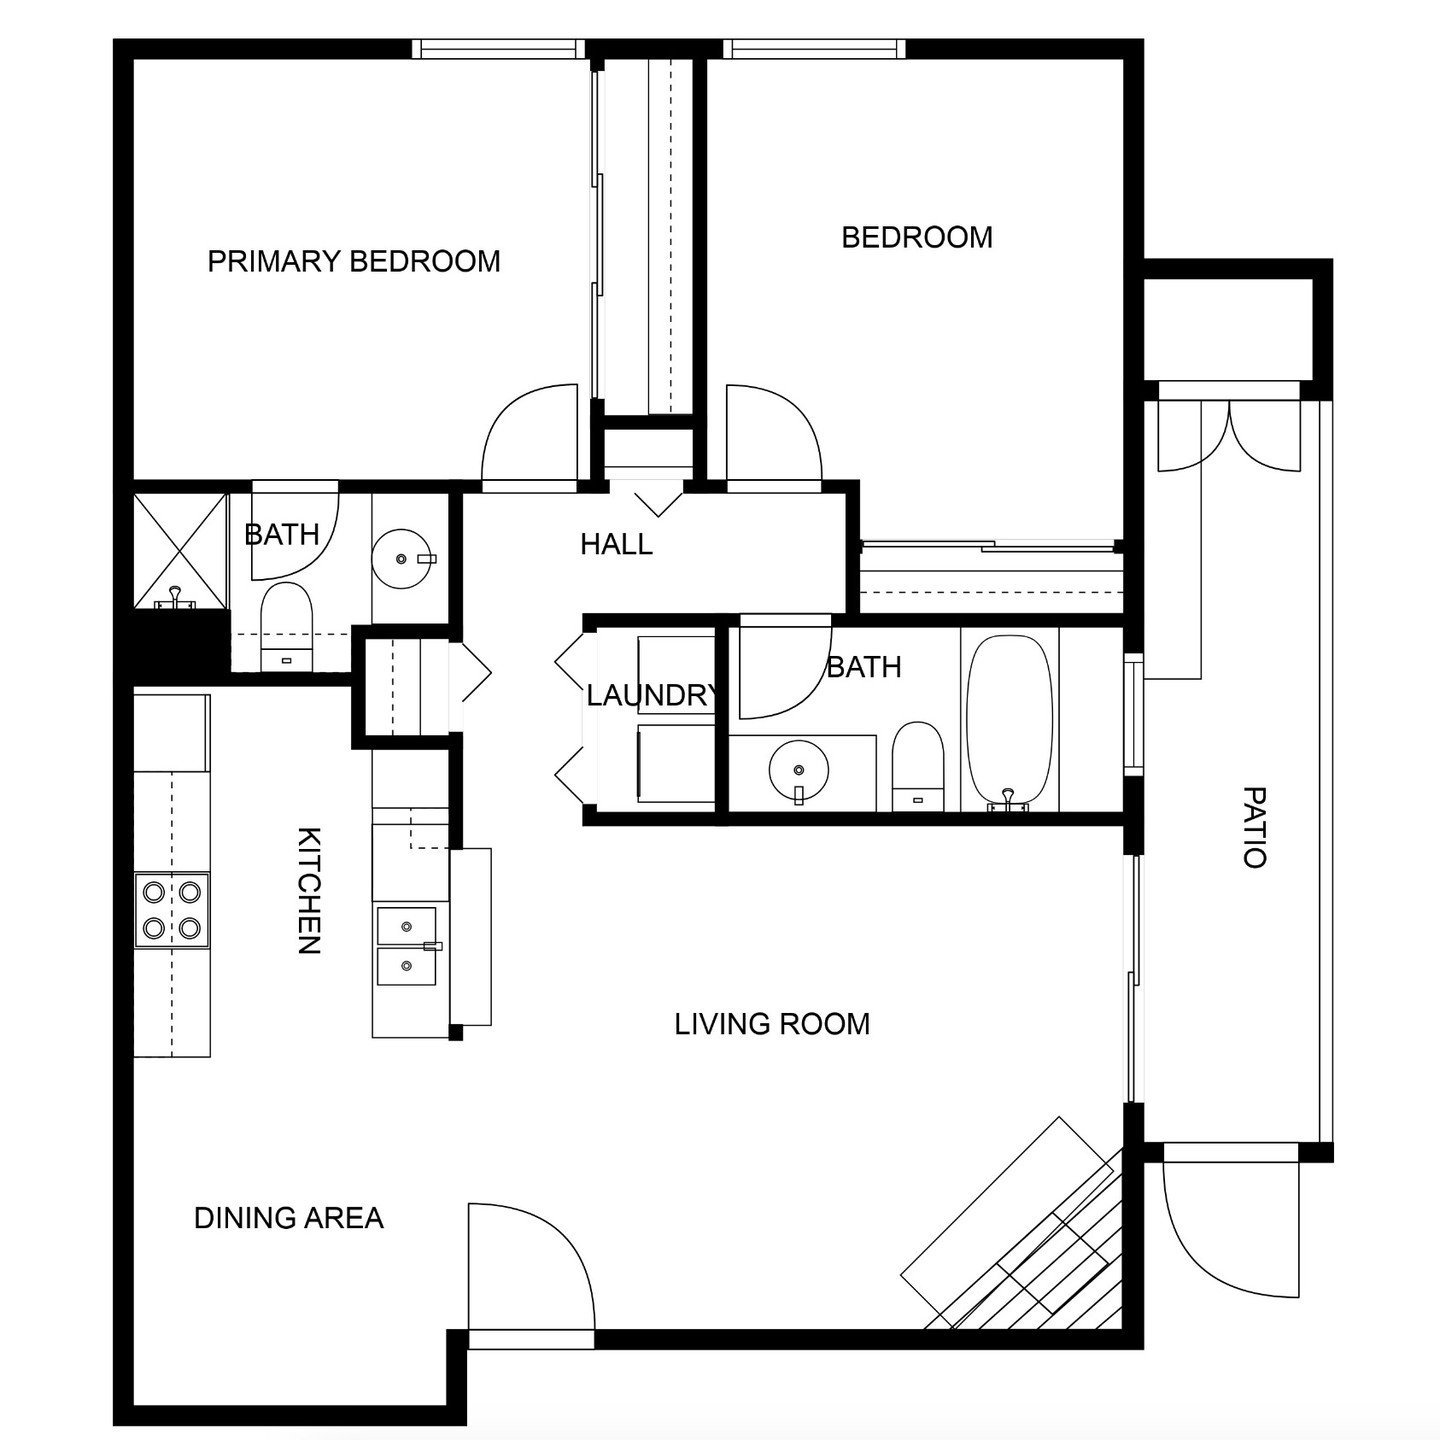 New! Now offering floorplans! Schedule yours with your next listing photos.